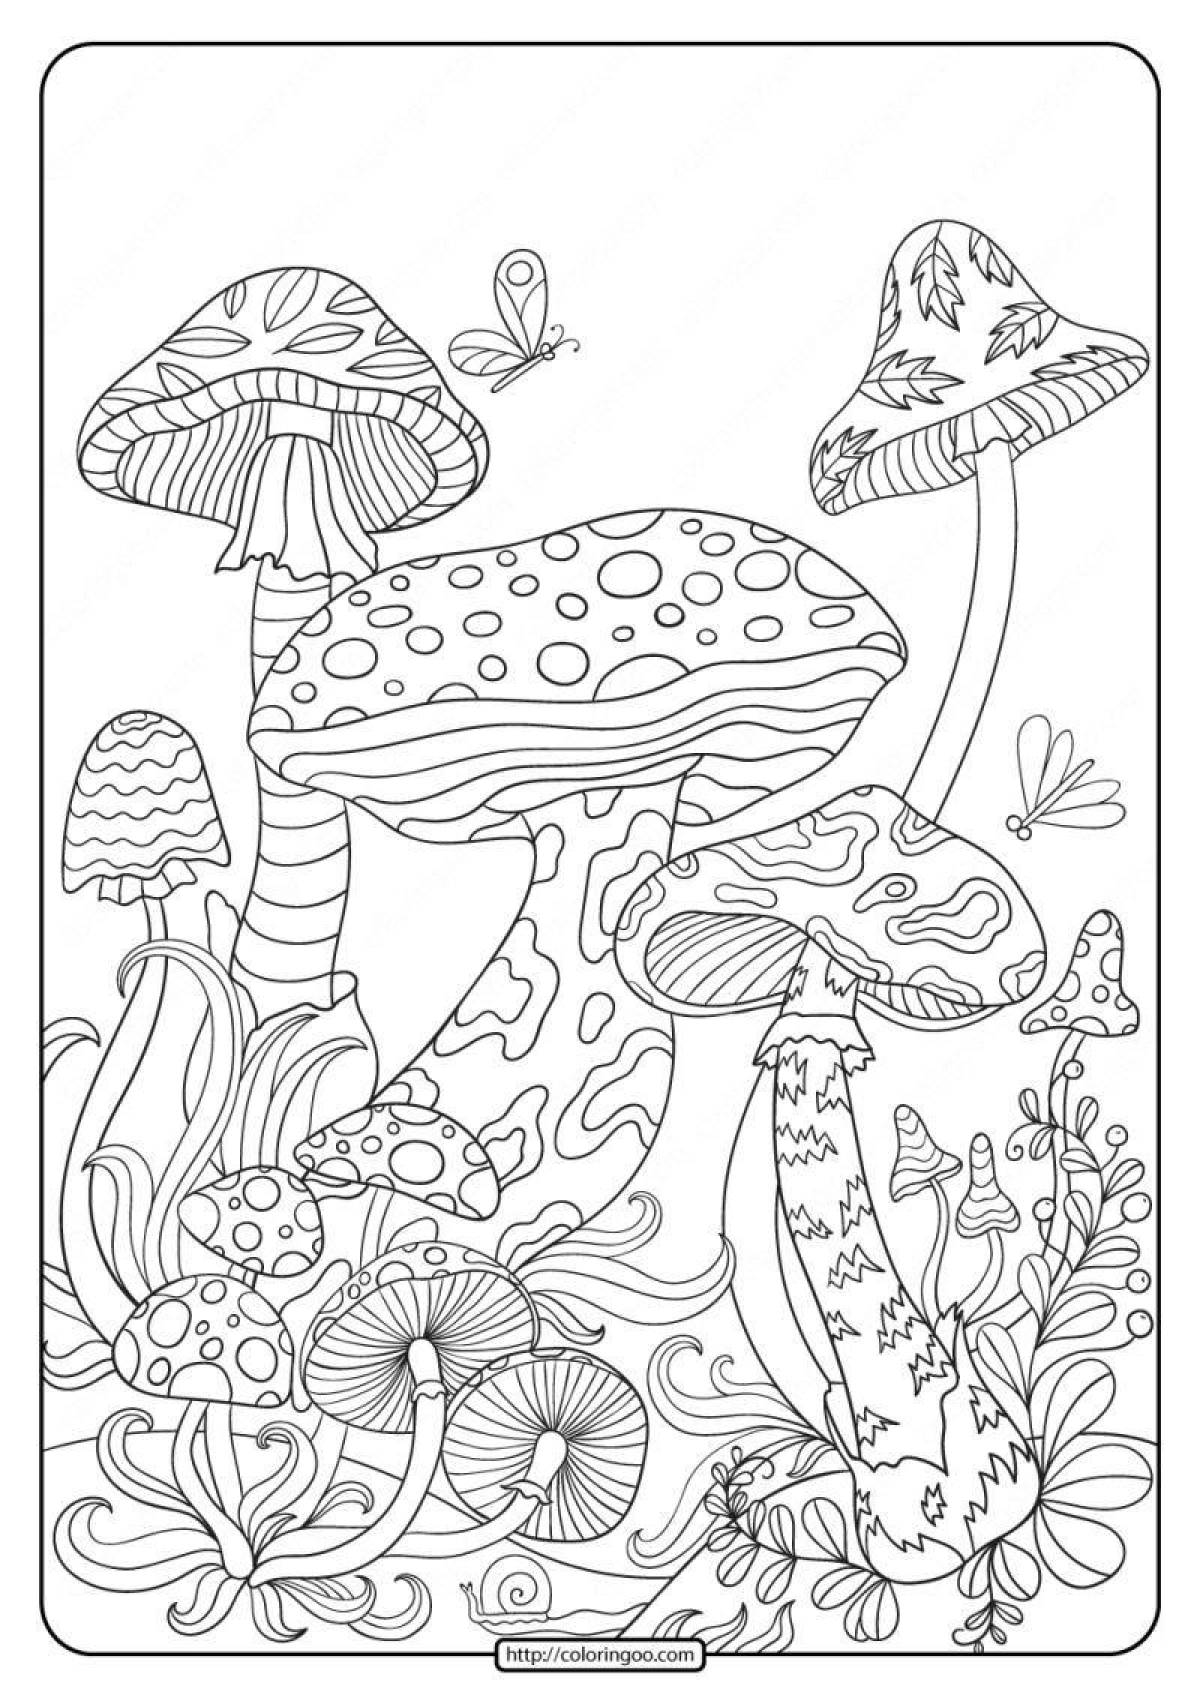 Indie kids coloring pages with crazy colors